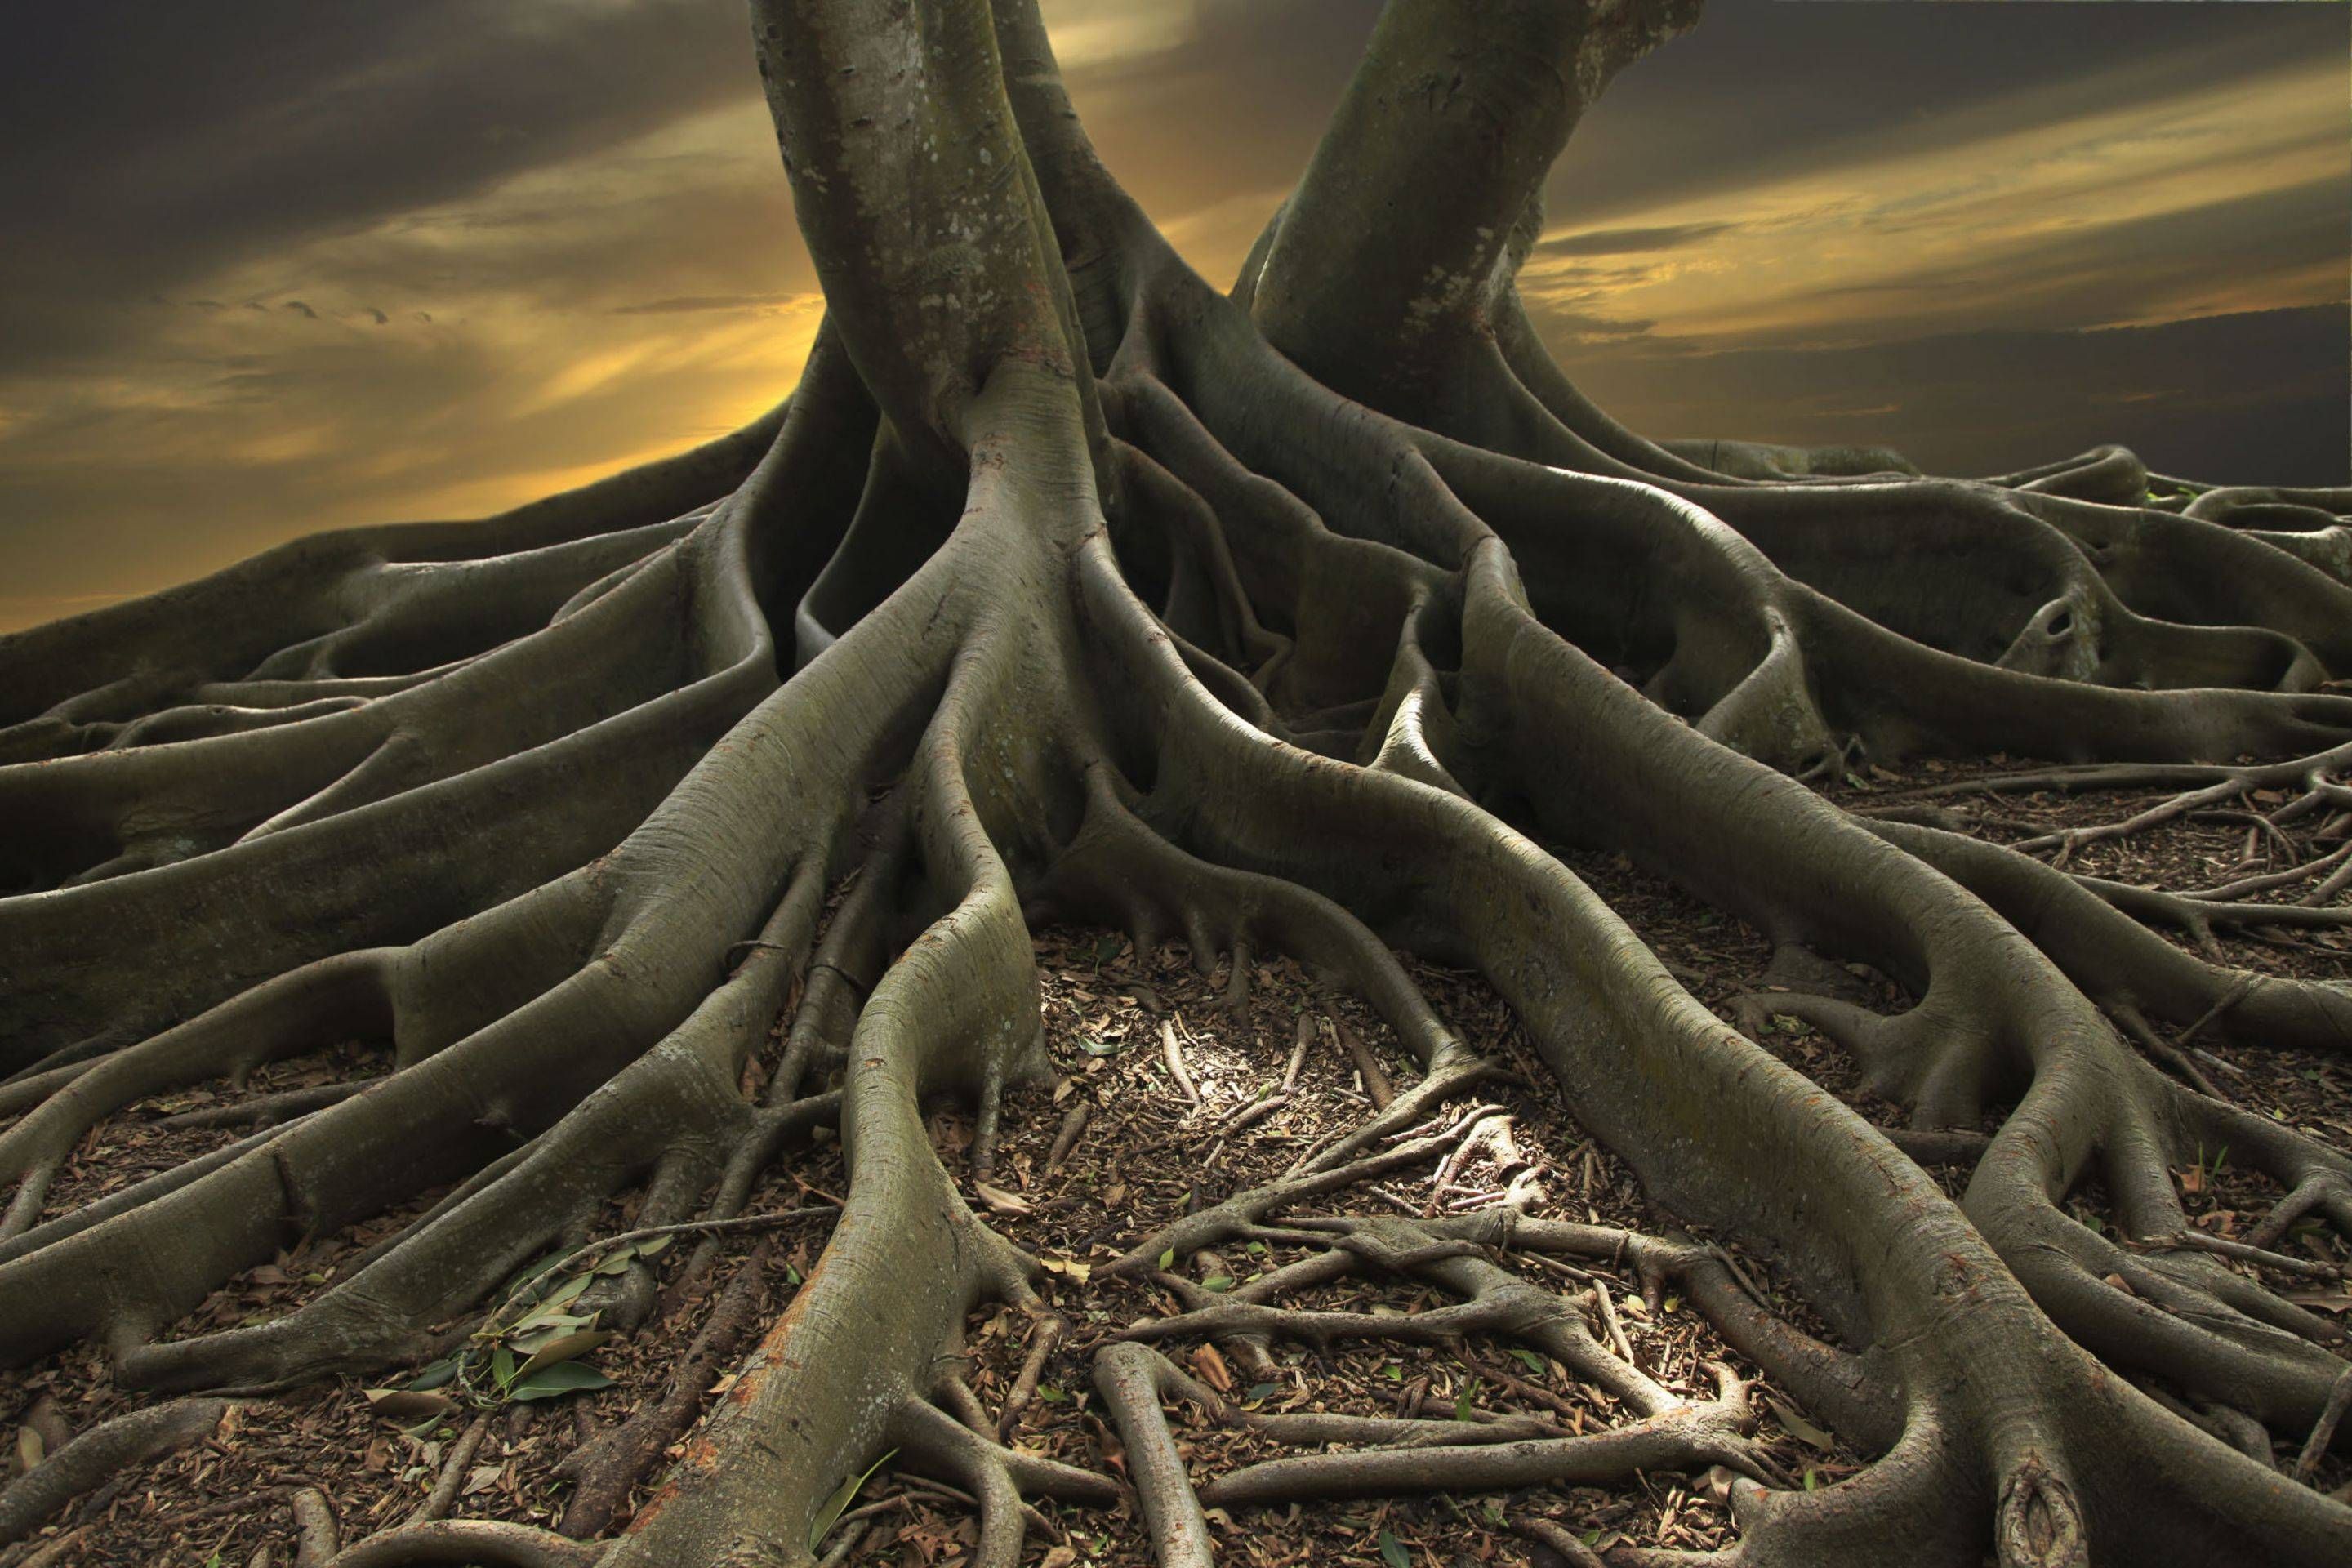 The mighty roots of the banyan tree. | Provocative | Pinterest